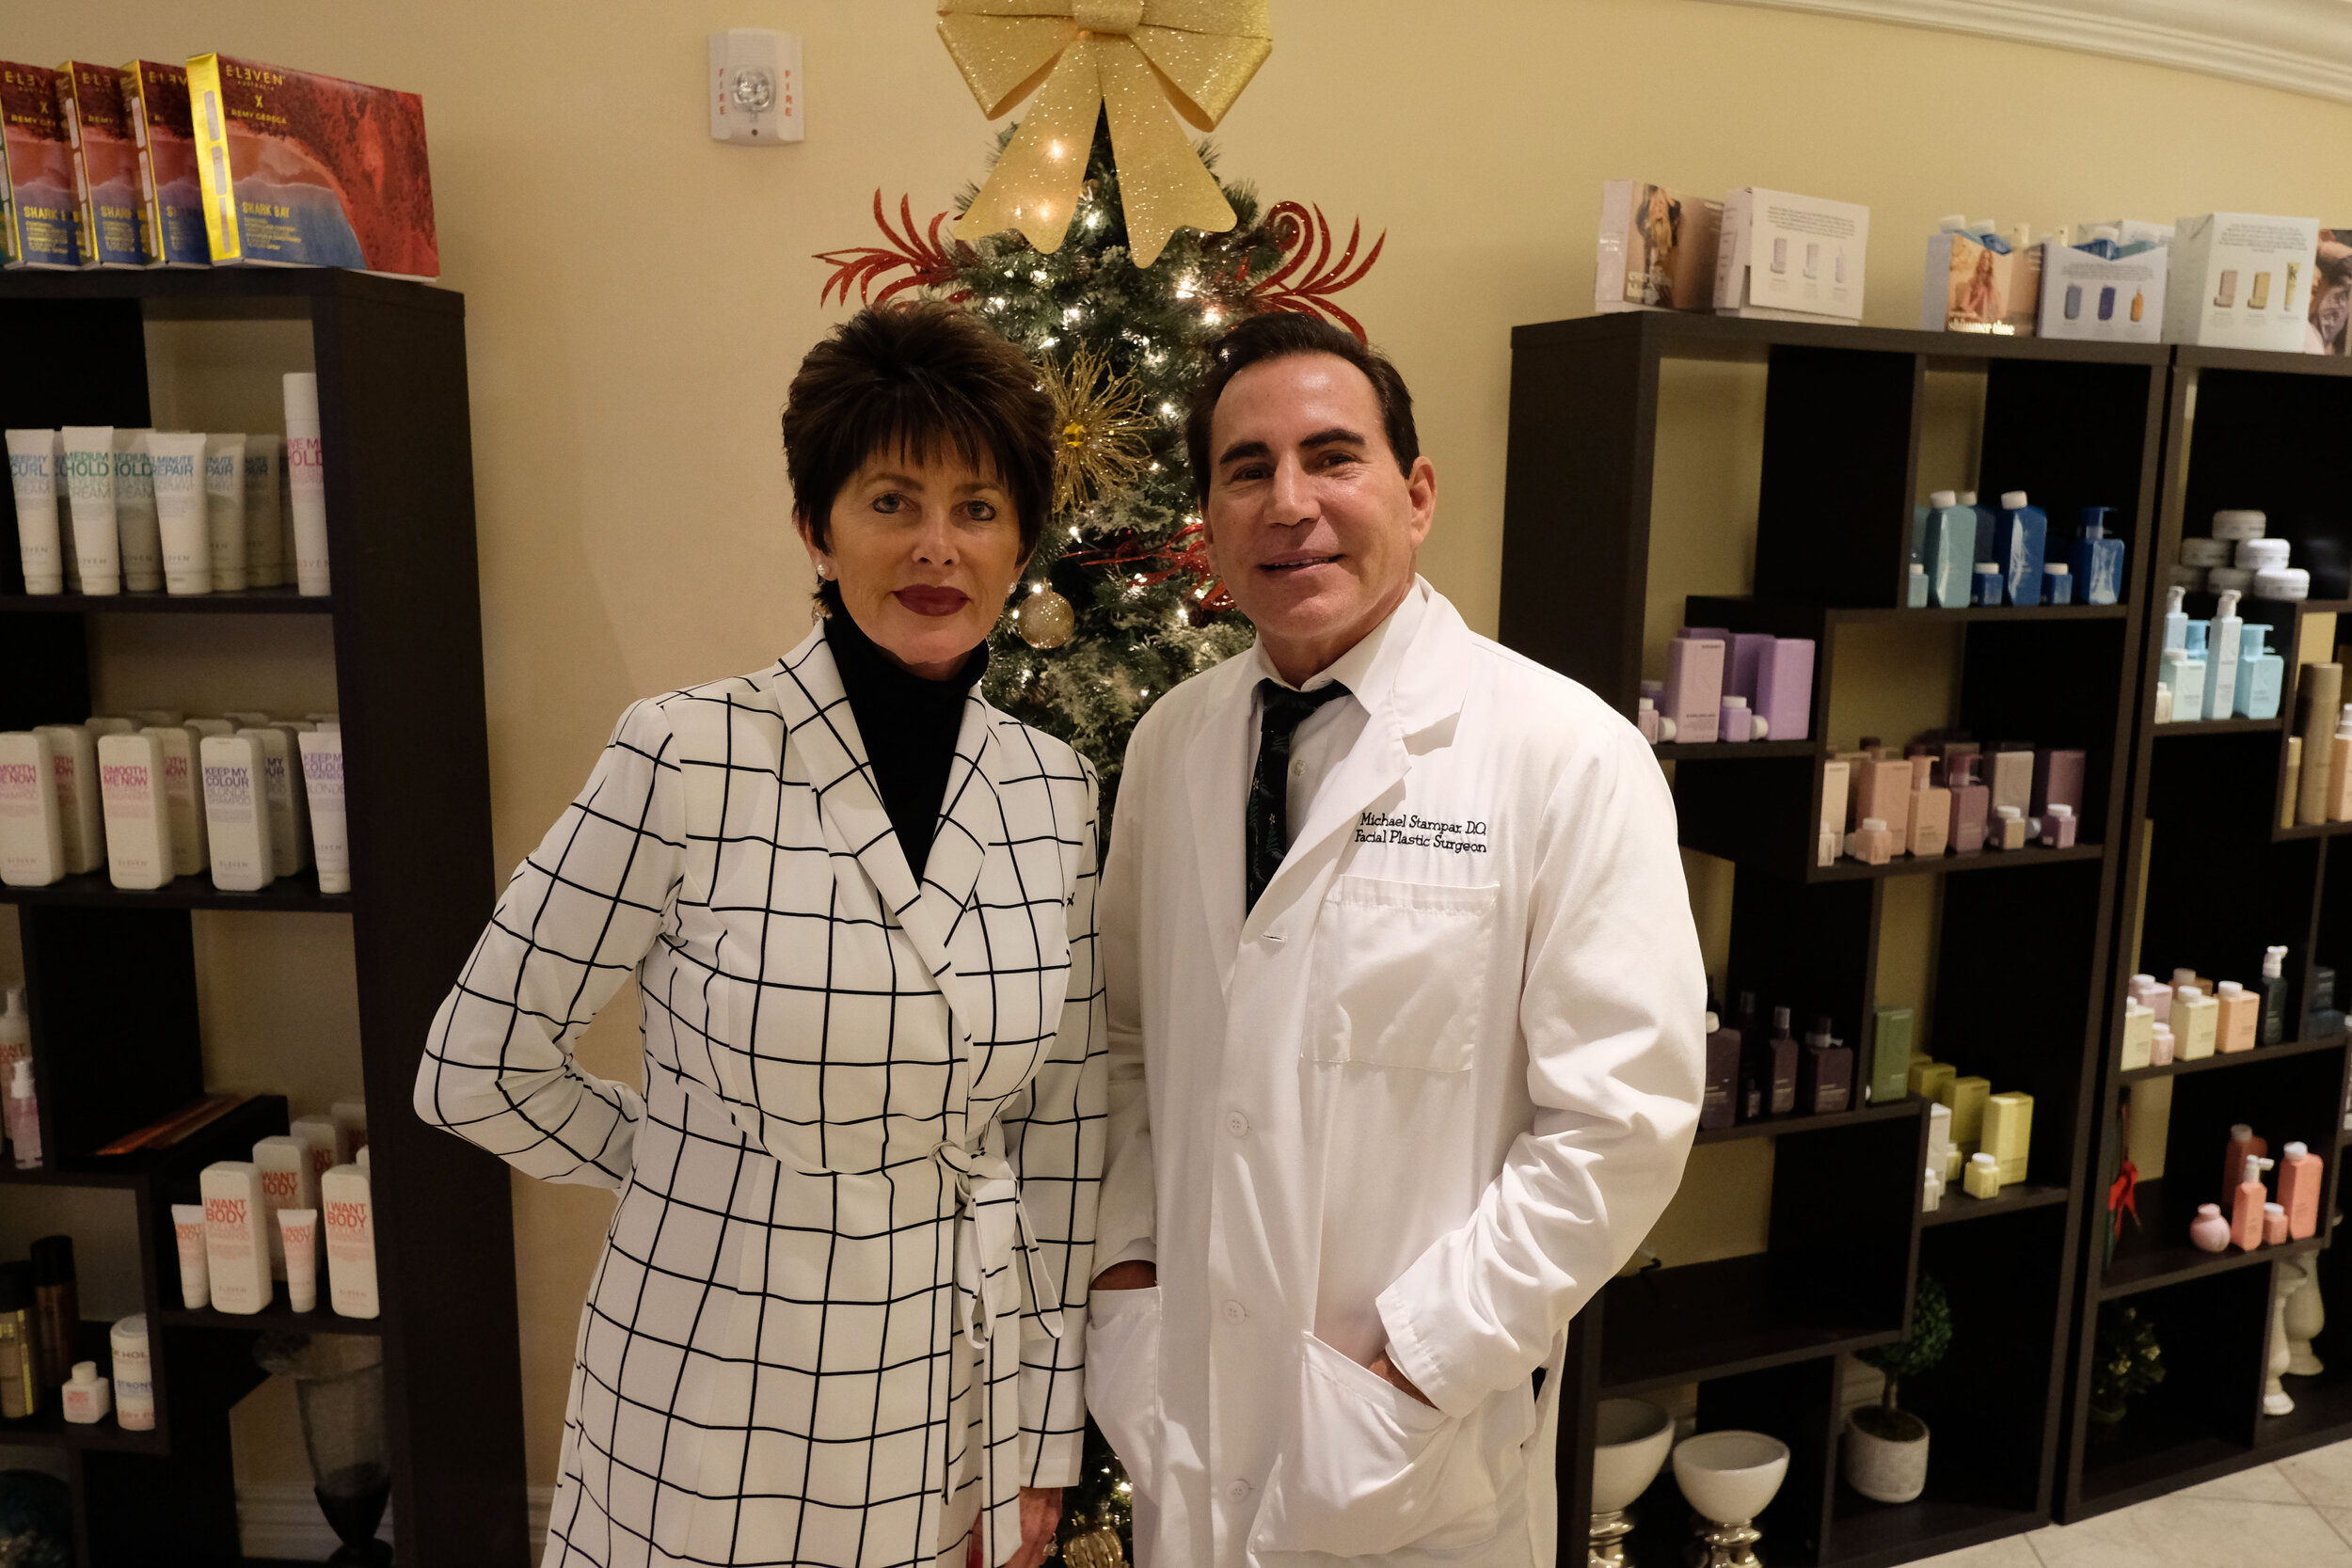 Owners and Medical Directors of Spago Day Spa and Medispa, Dr. Cathy Criss and Dr. Michael Stampar